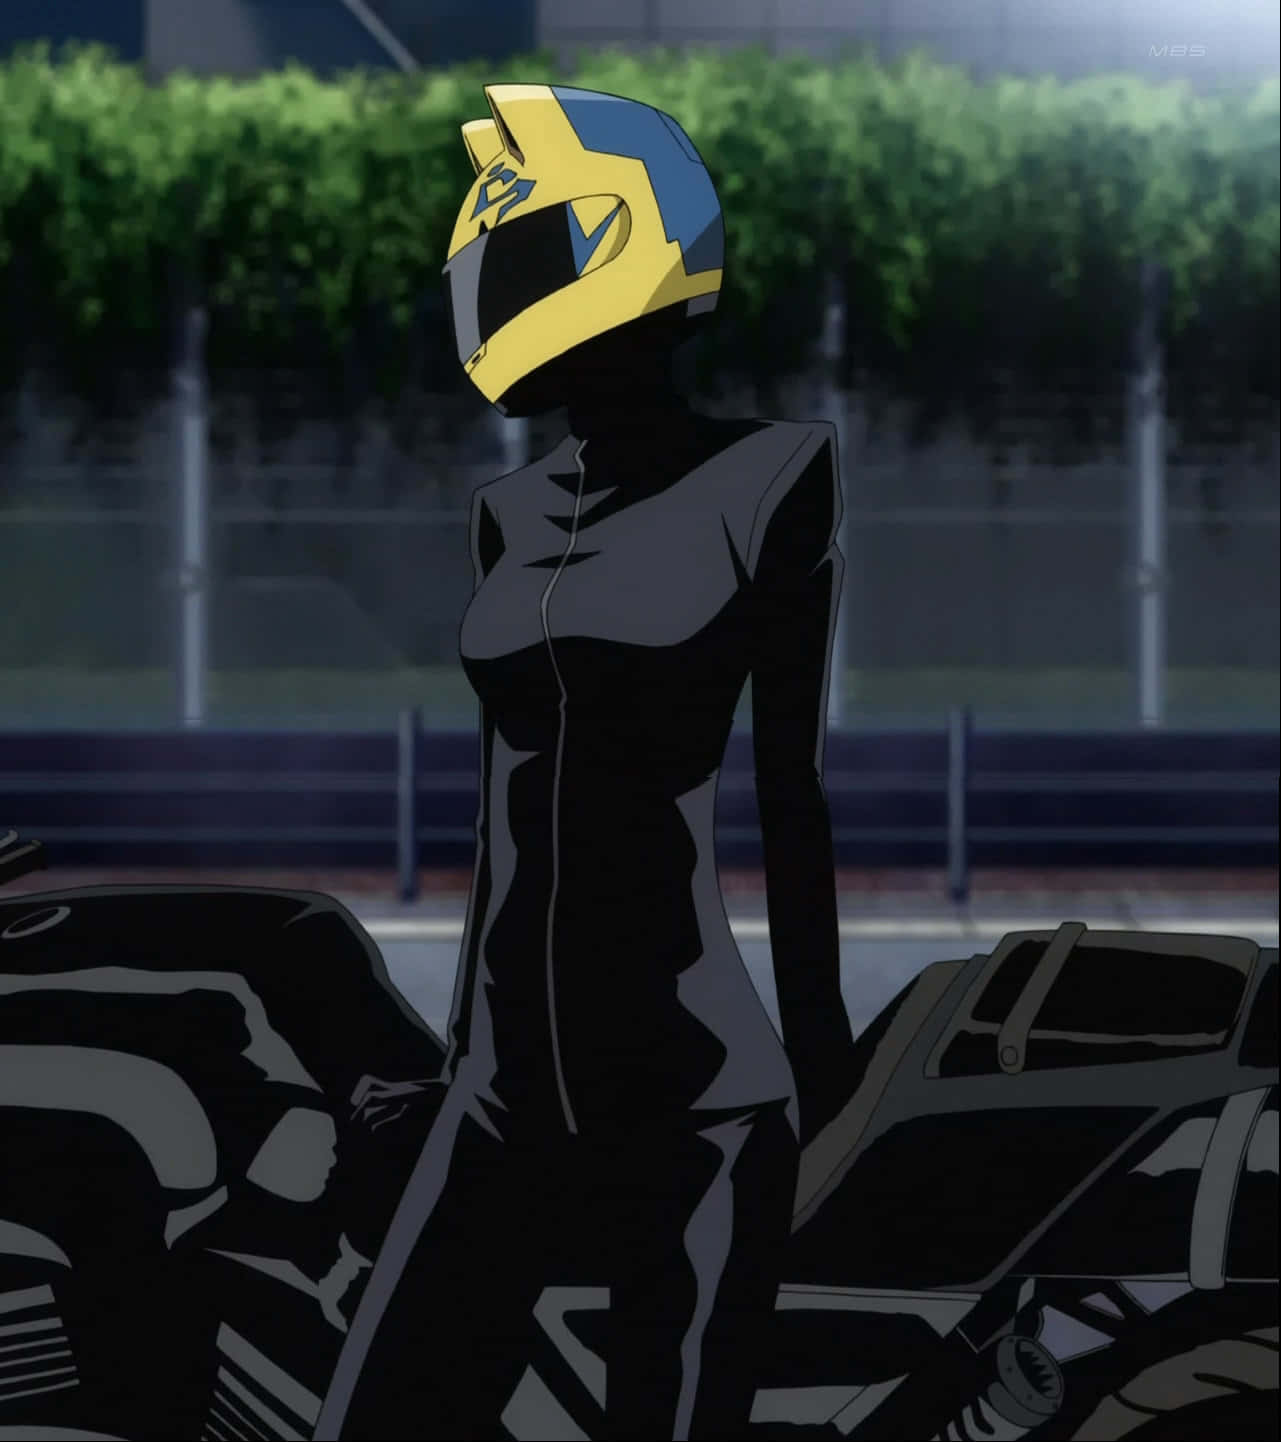 Mysterious and stylish, Celty Sturluson from Durarara!! Wallpaper